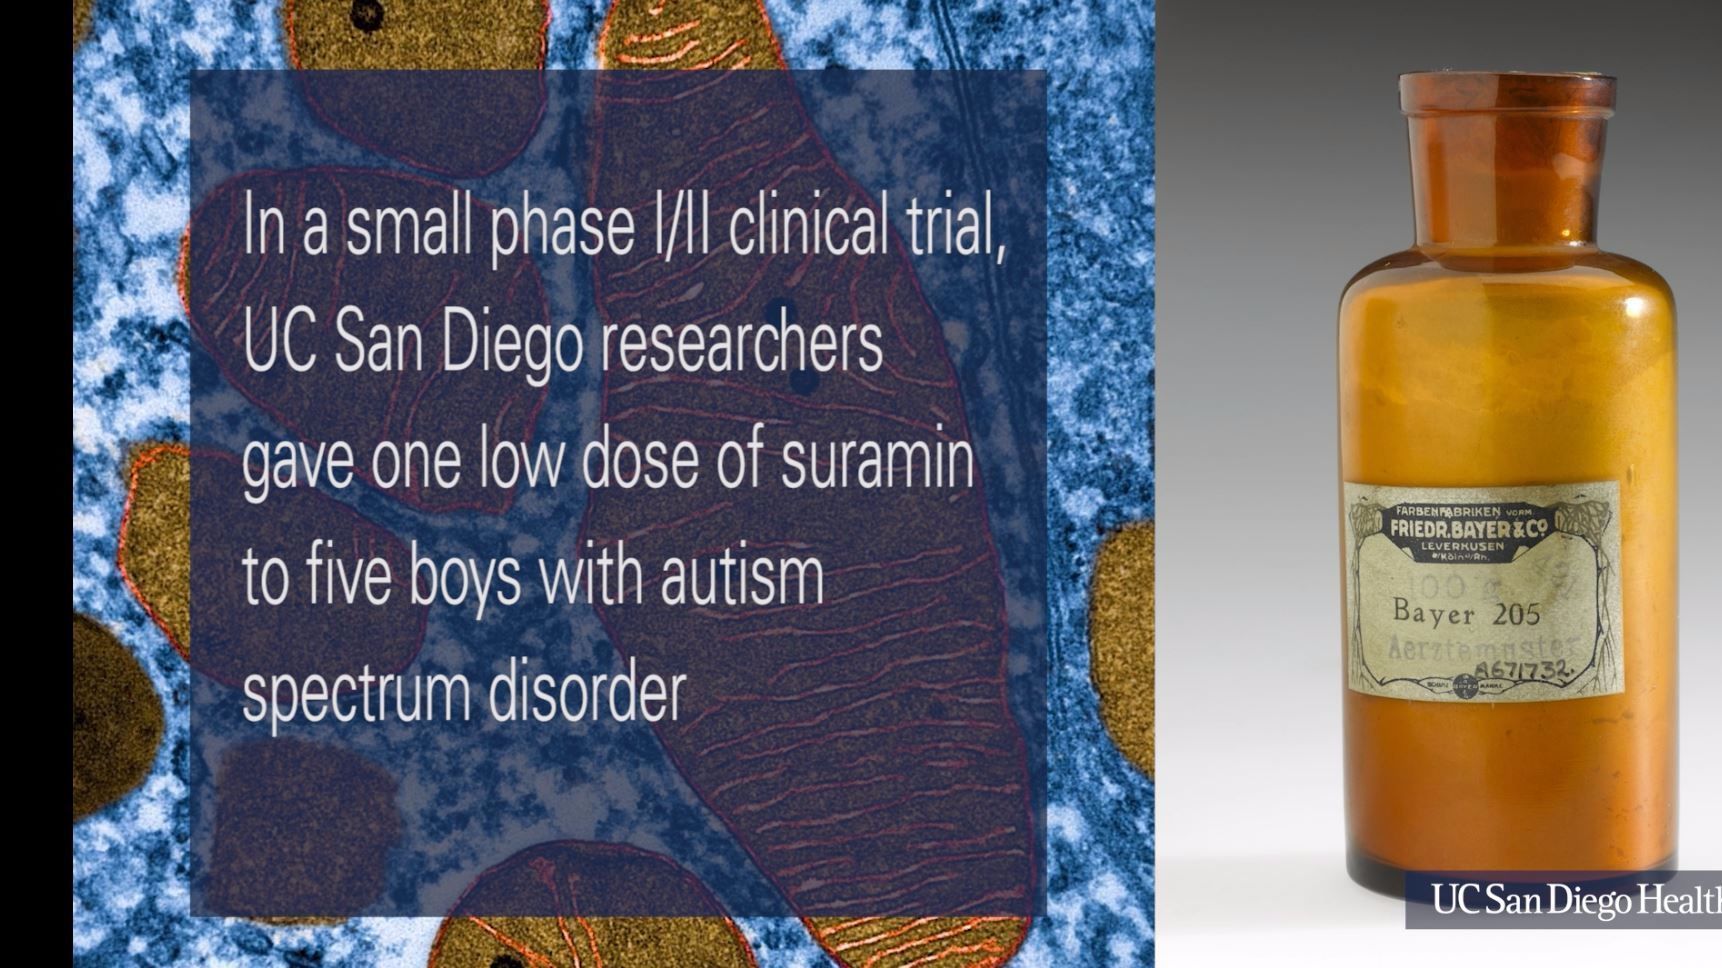 Autism symptoms improve in small clinical trial of century-old drug